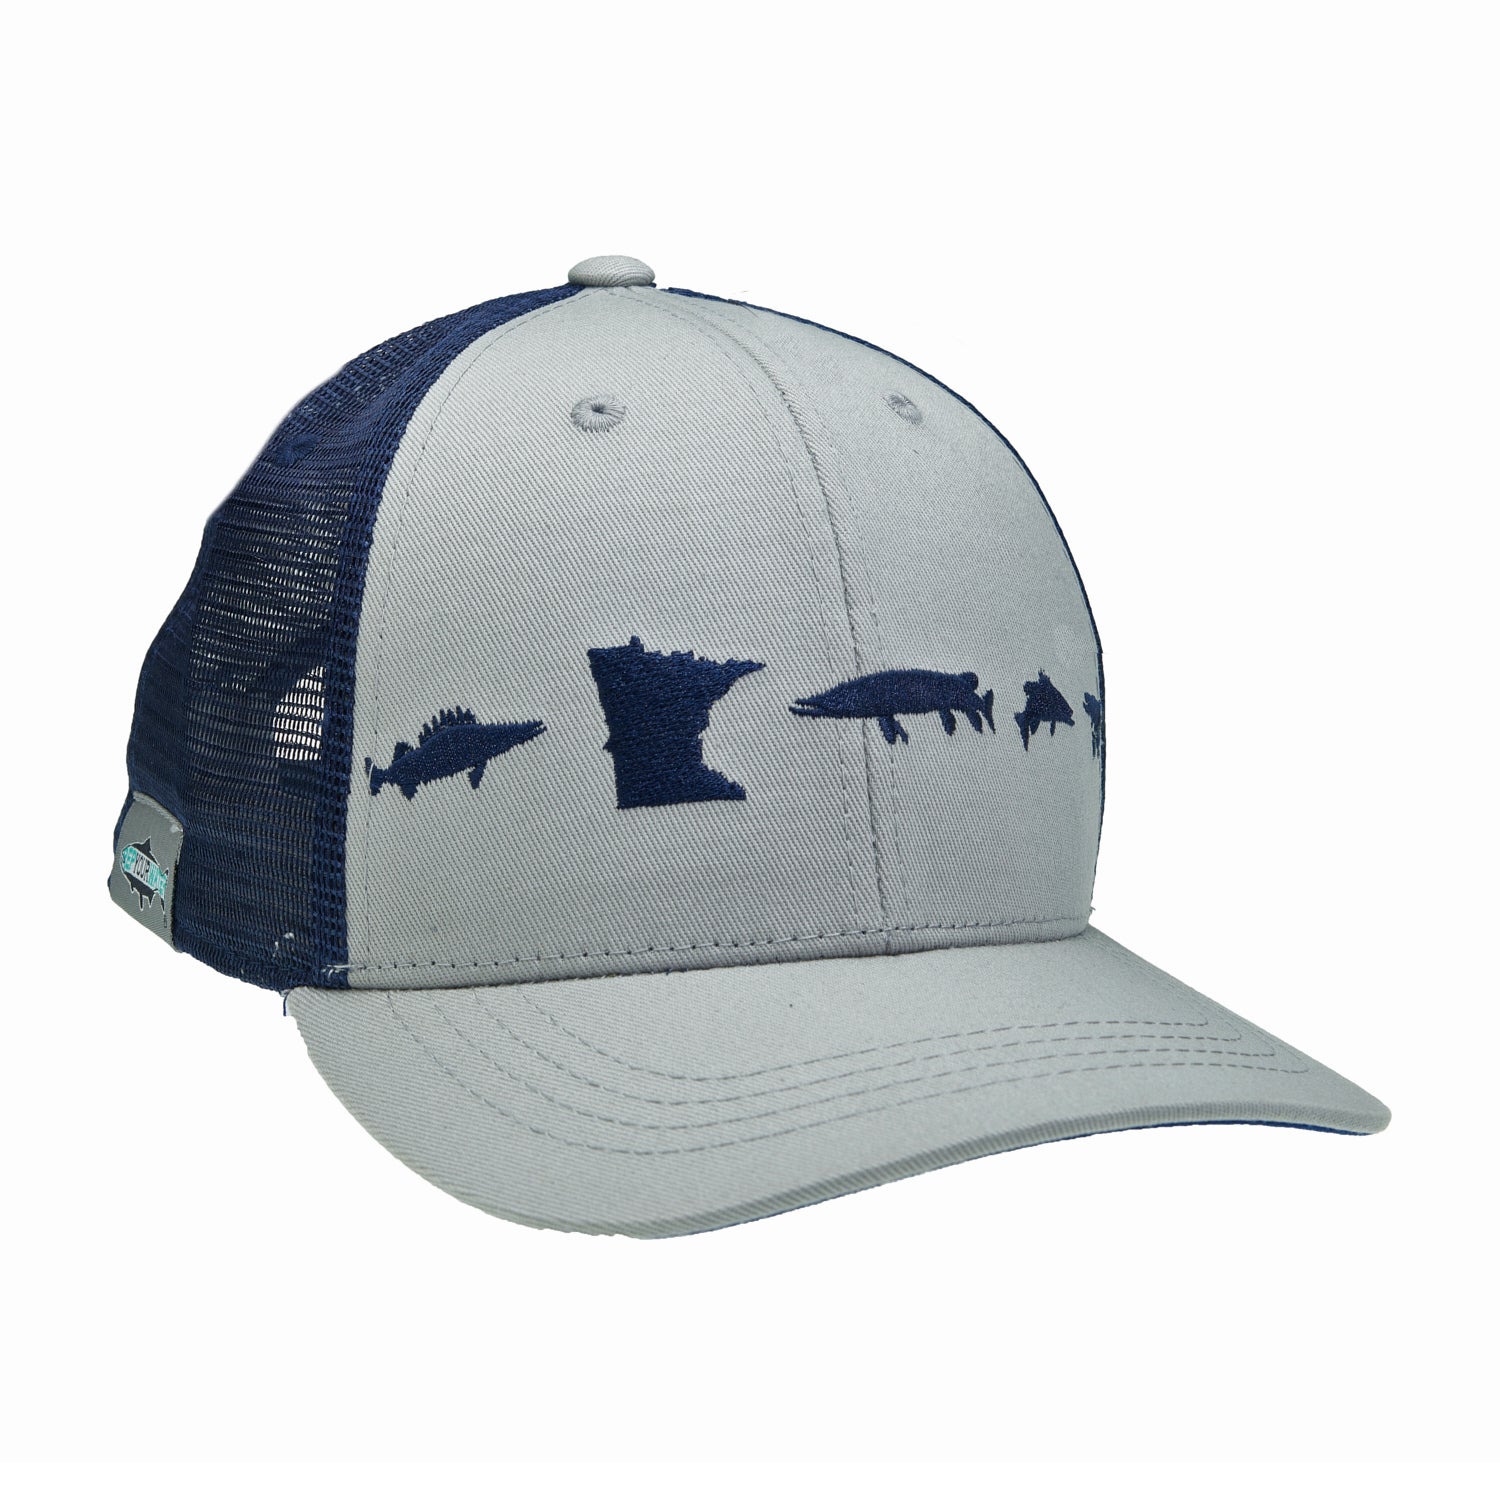 A hat with navy blue mesh in the back, light gray fabric in the front and fish embroidered across the front of the hat with the state shape of Minnesota.